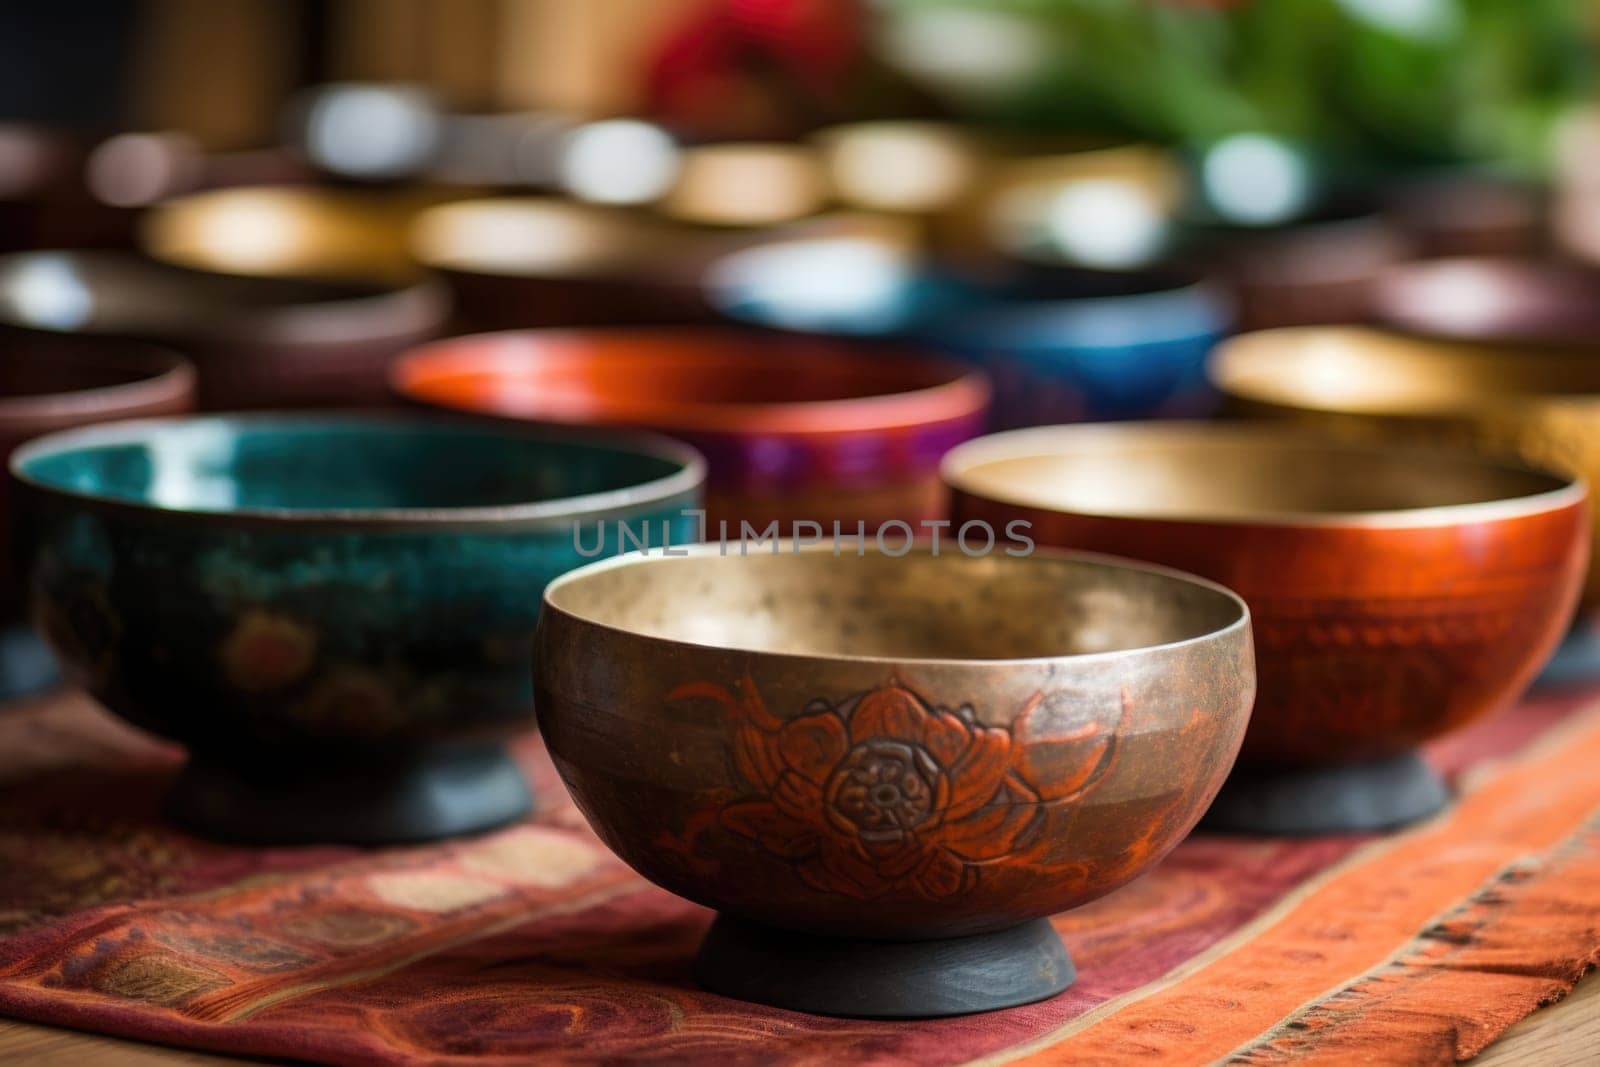 There are many Tibetan bowls on the table by Lobachad